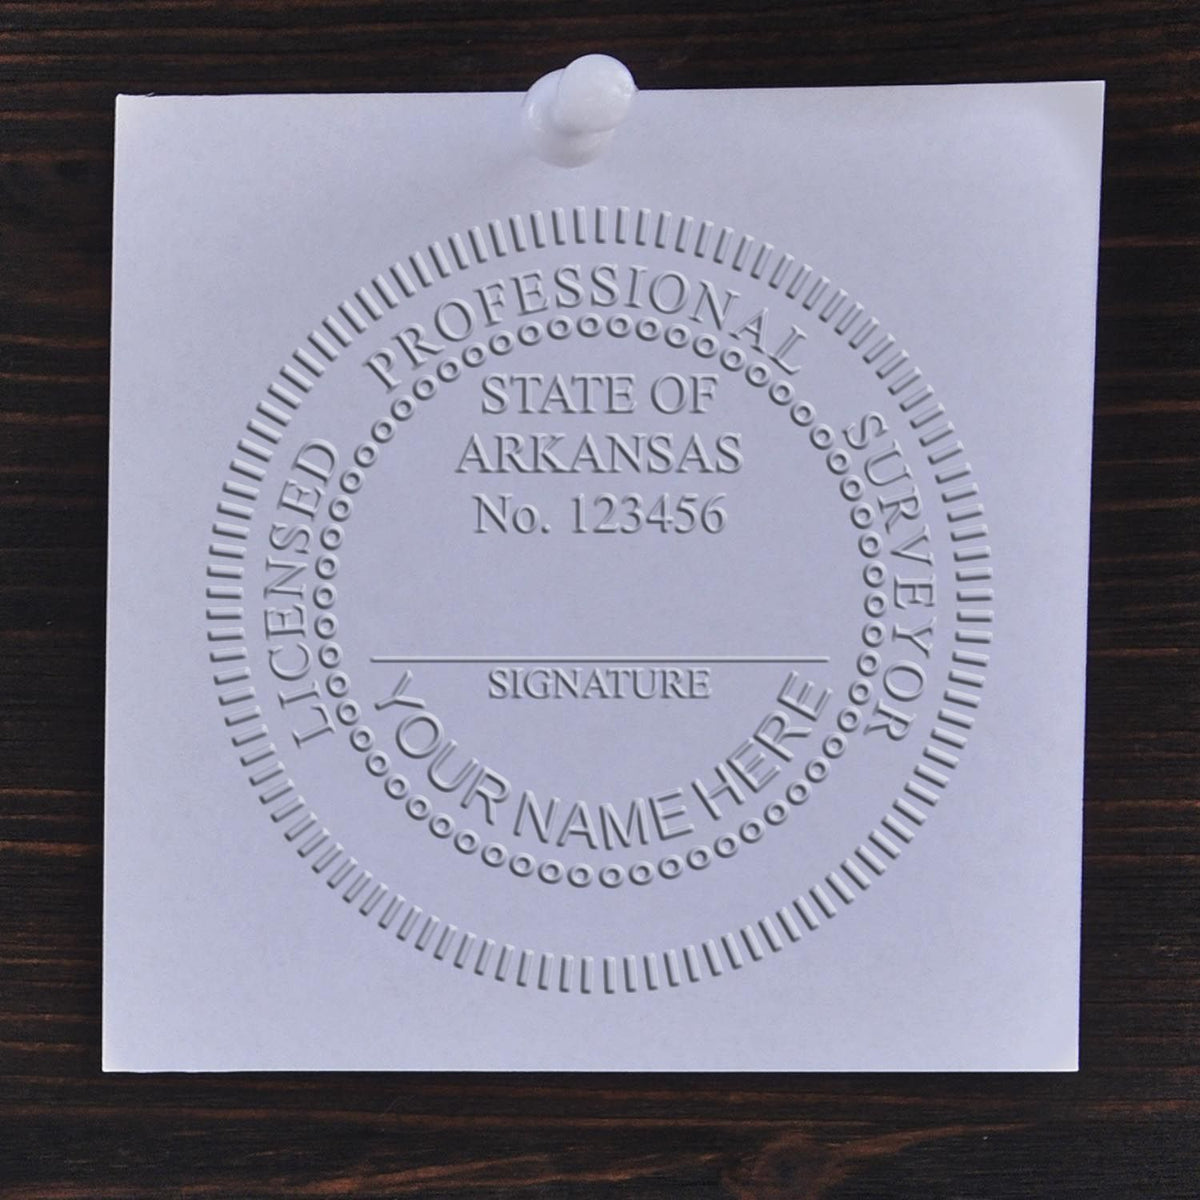 A stamped impression of the Handheld Arkansas Land Surveyor Seal in this stylish lifestyle photo, setting the tone for a unique and personalized product.